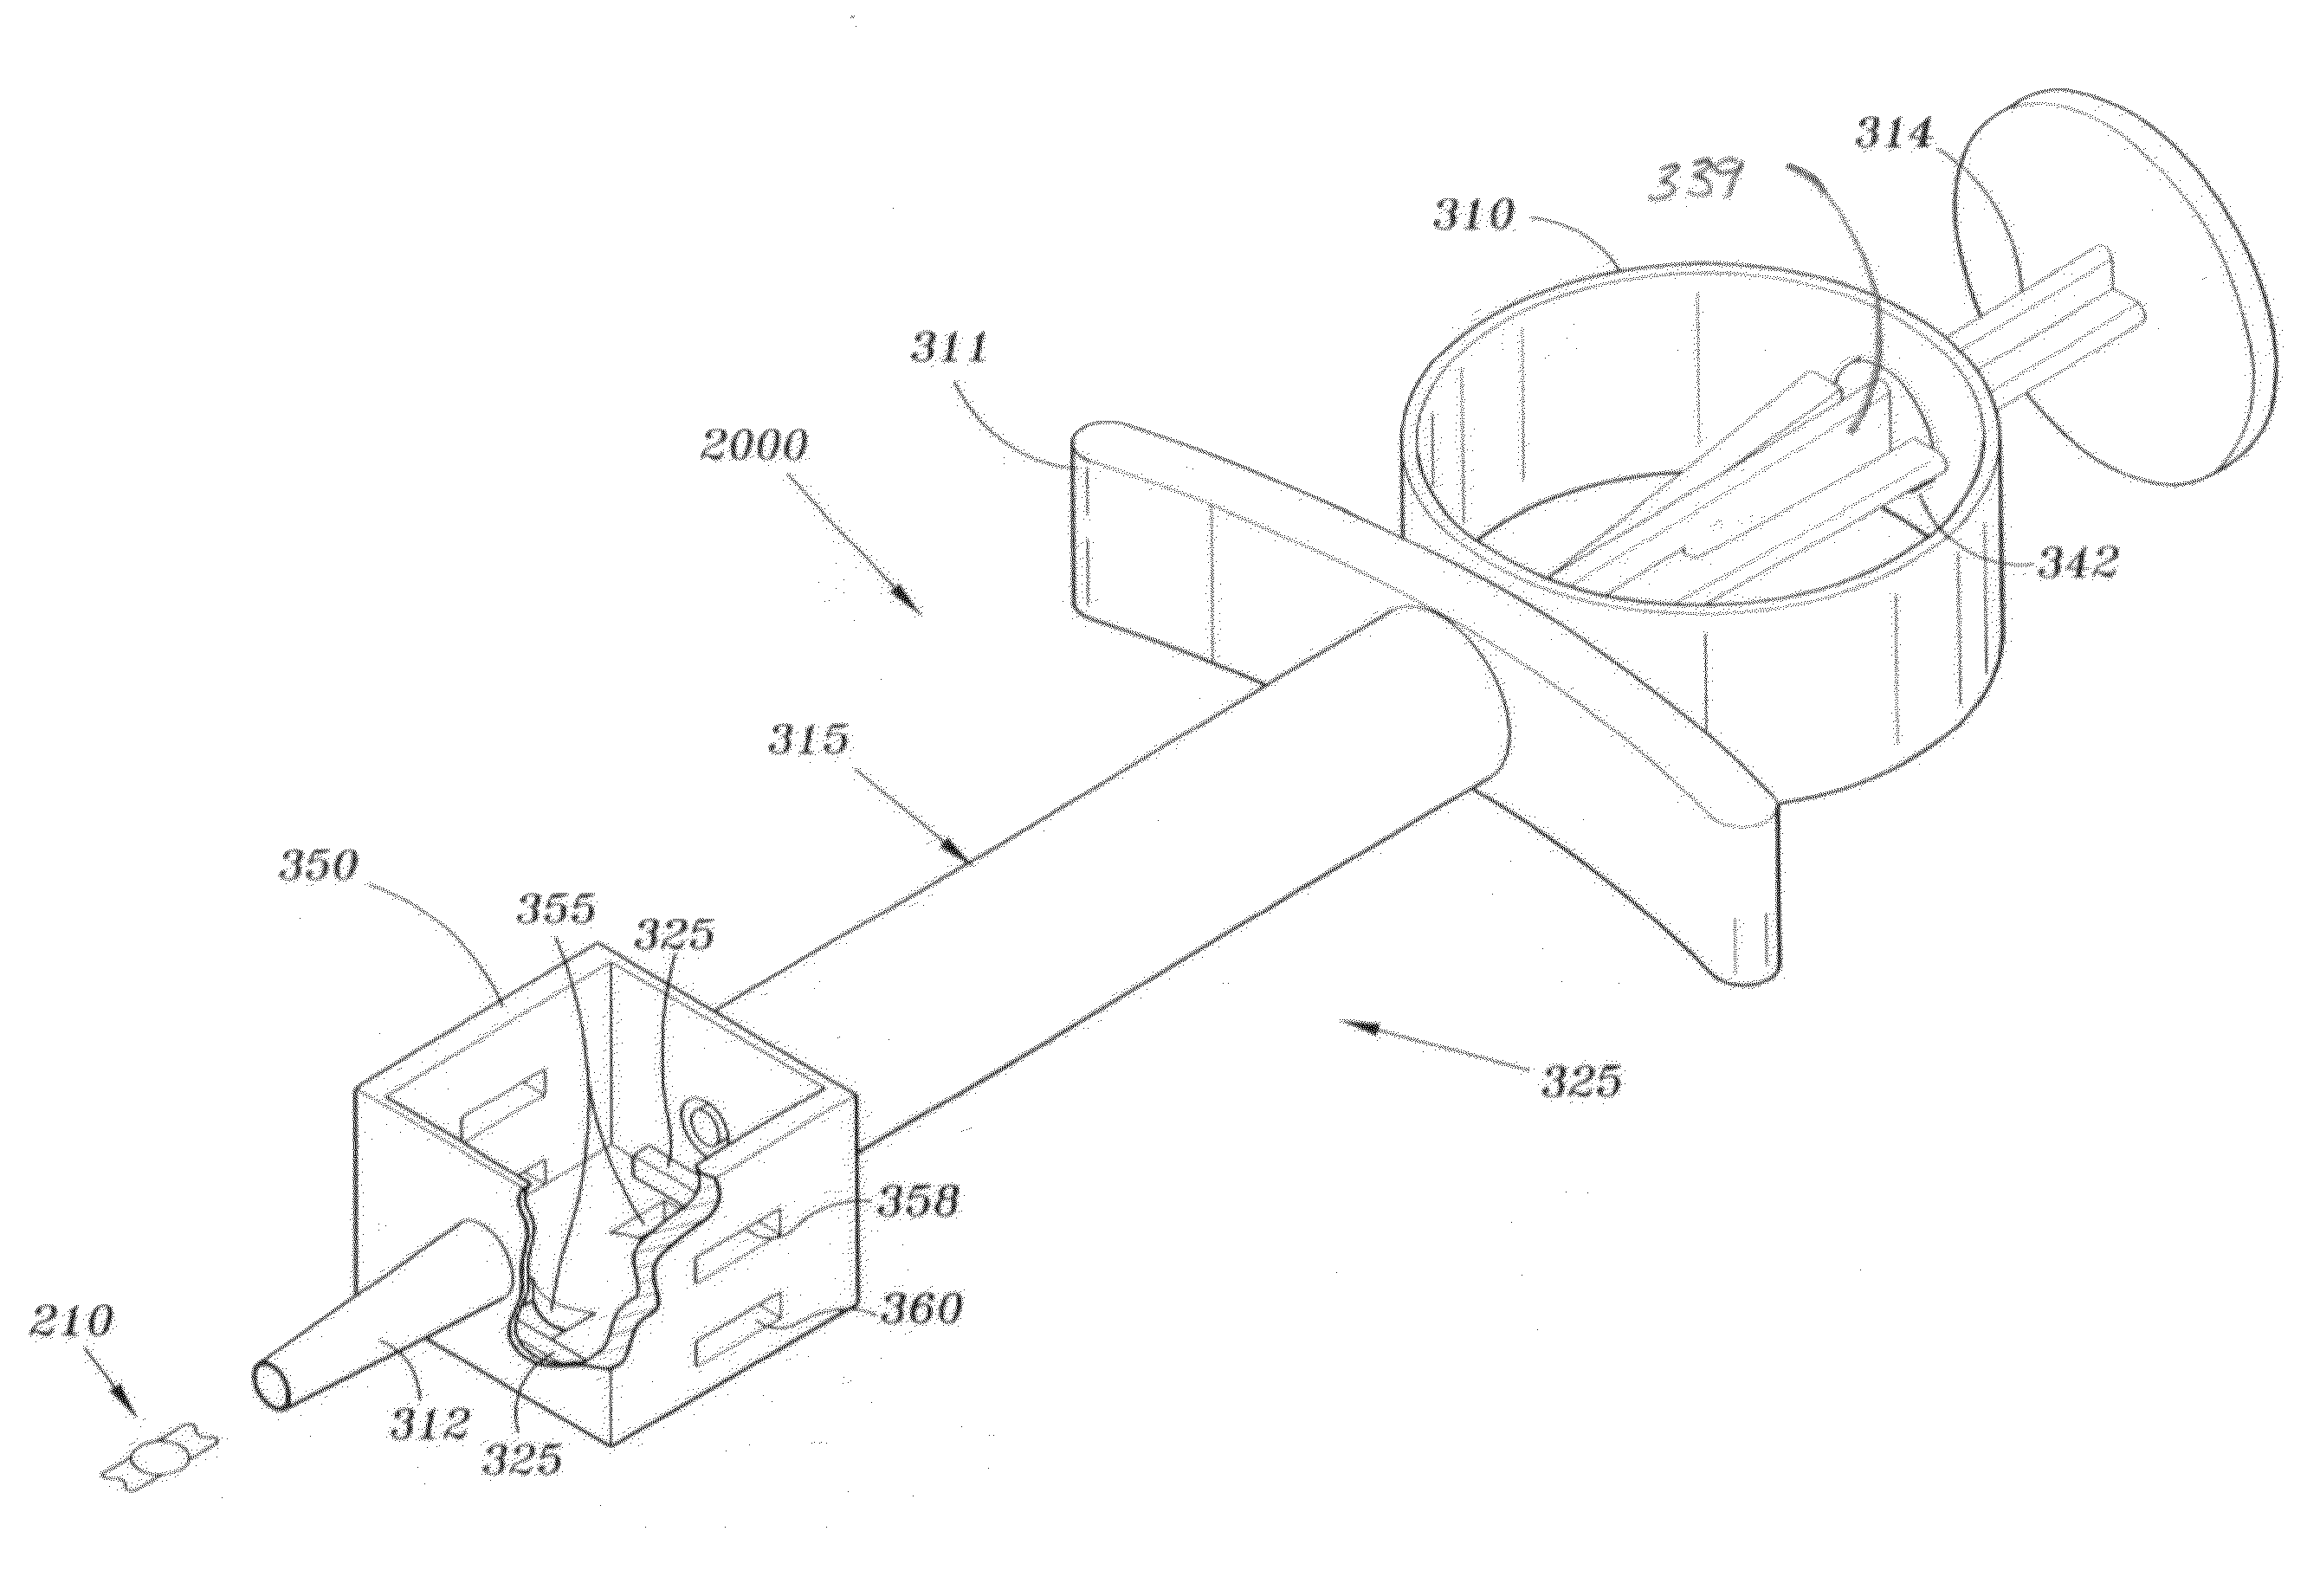 System and Method for Storing, Shipping and Injecting Ocular Devices